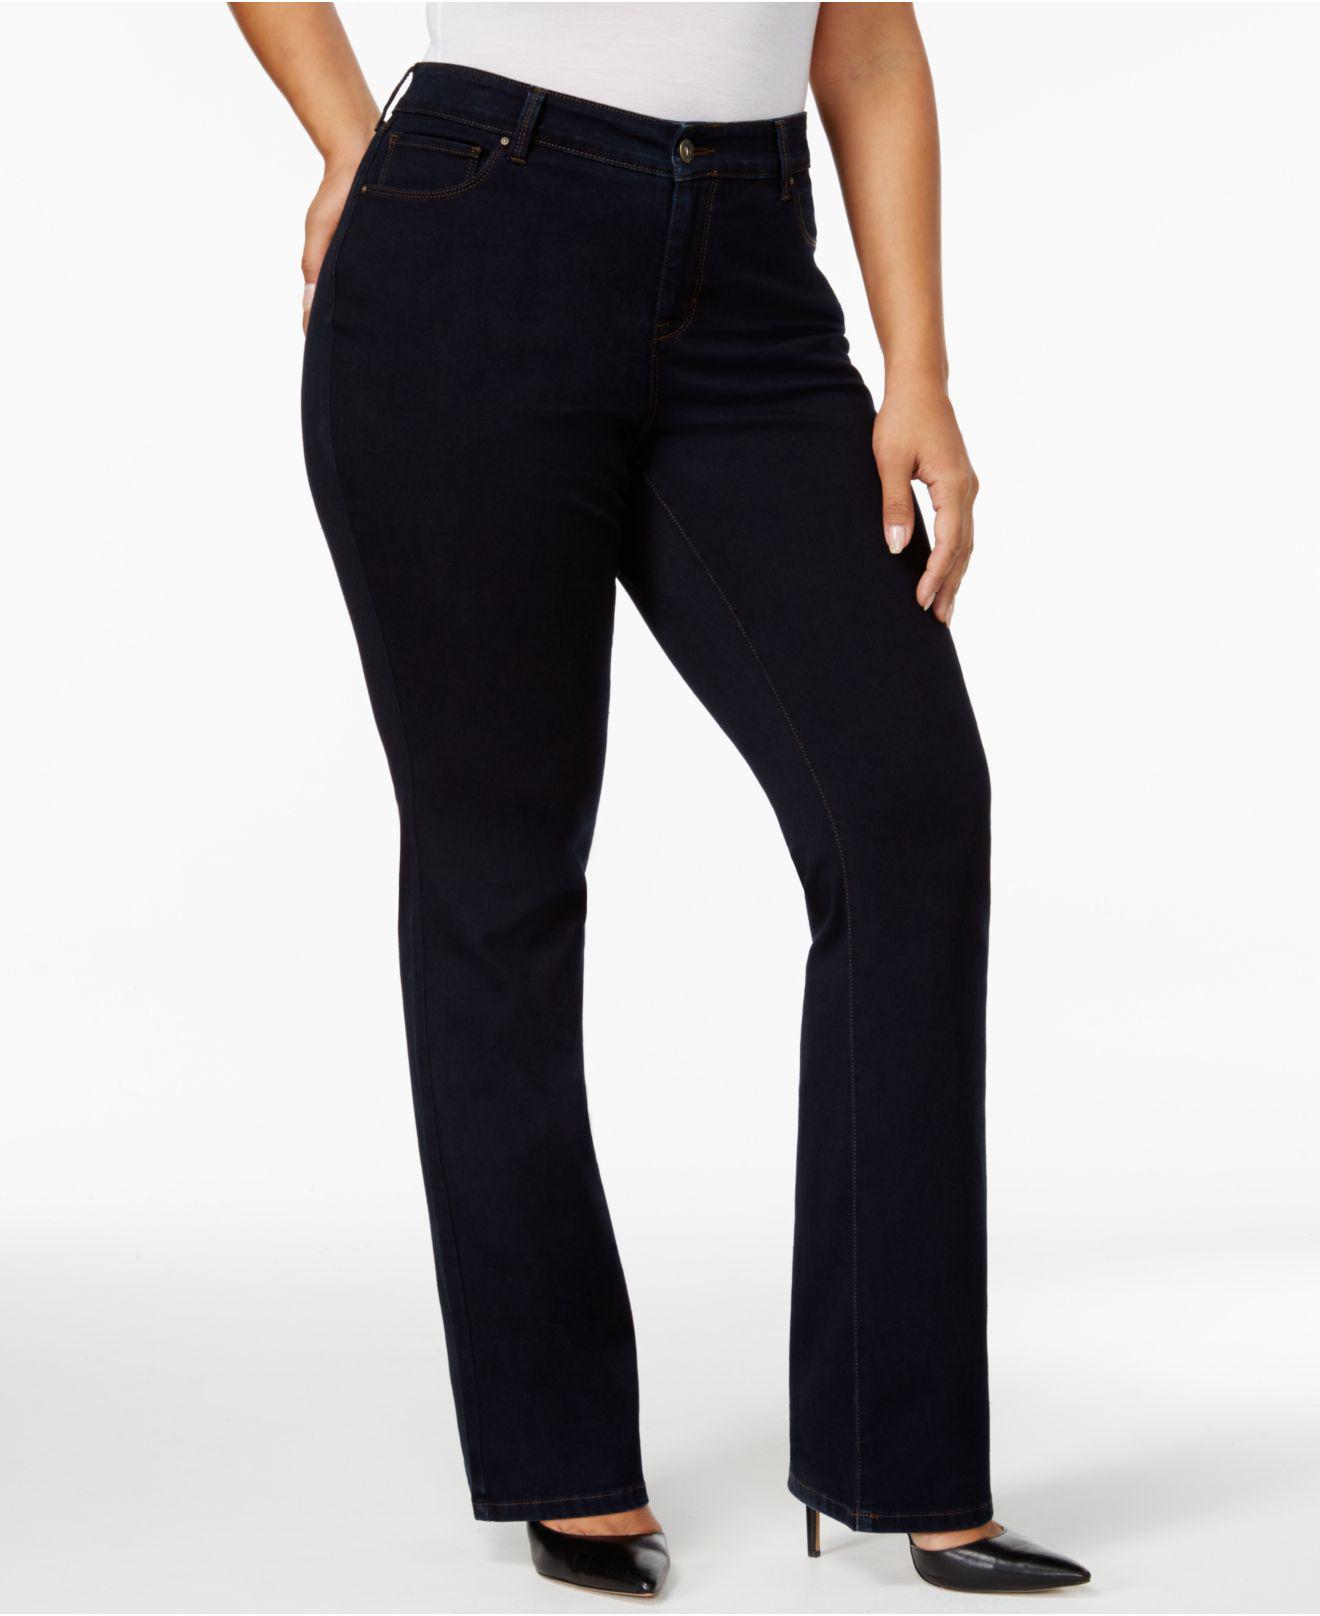 Lyst - Style & Co. Plus Size Jeans, Tummy Control Bootcut, Noir Wash in ...